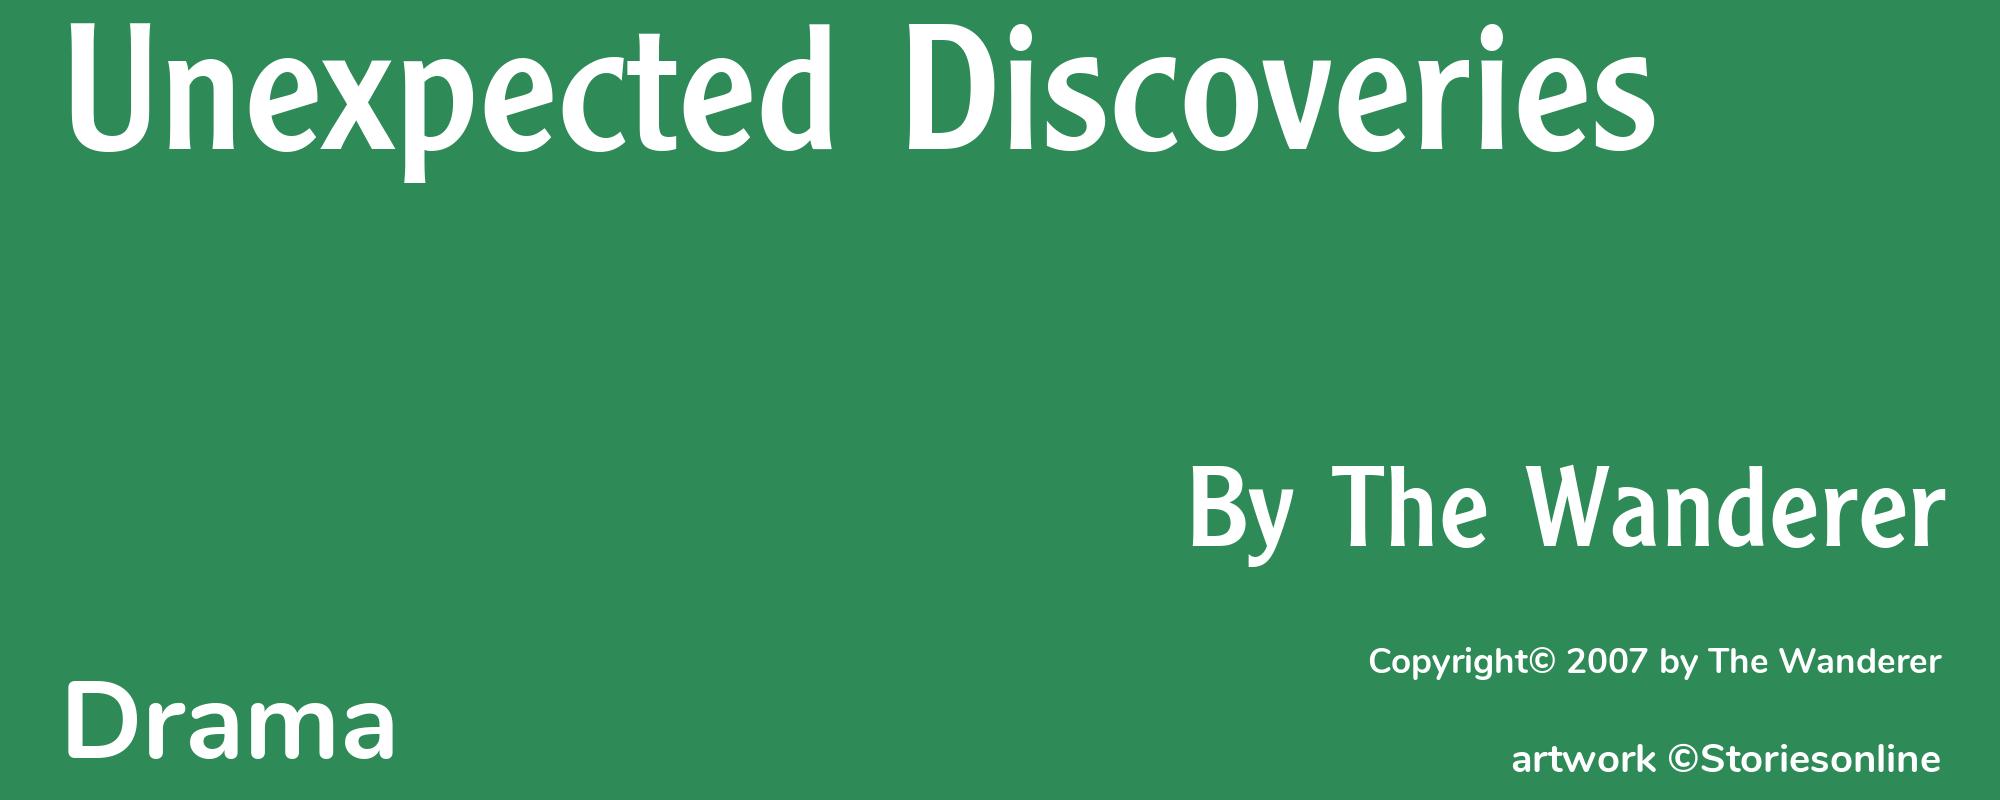 Unexpected Discoveries - Cover